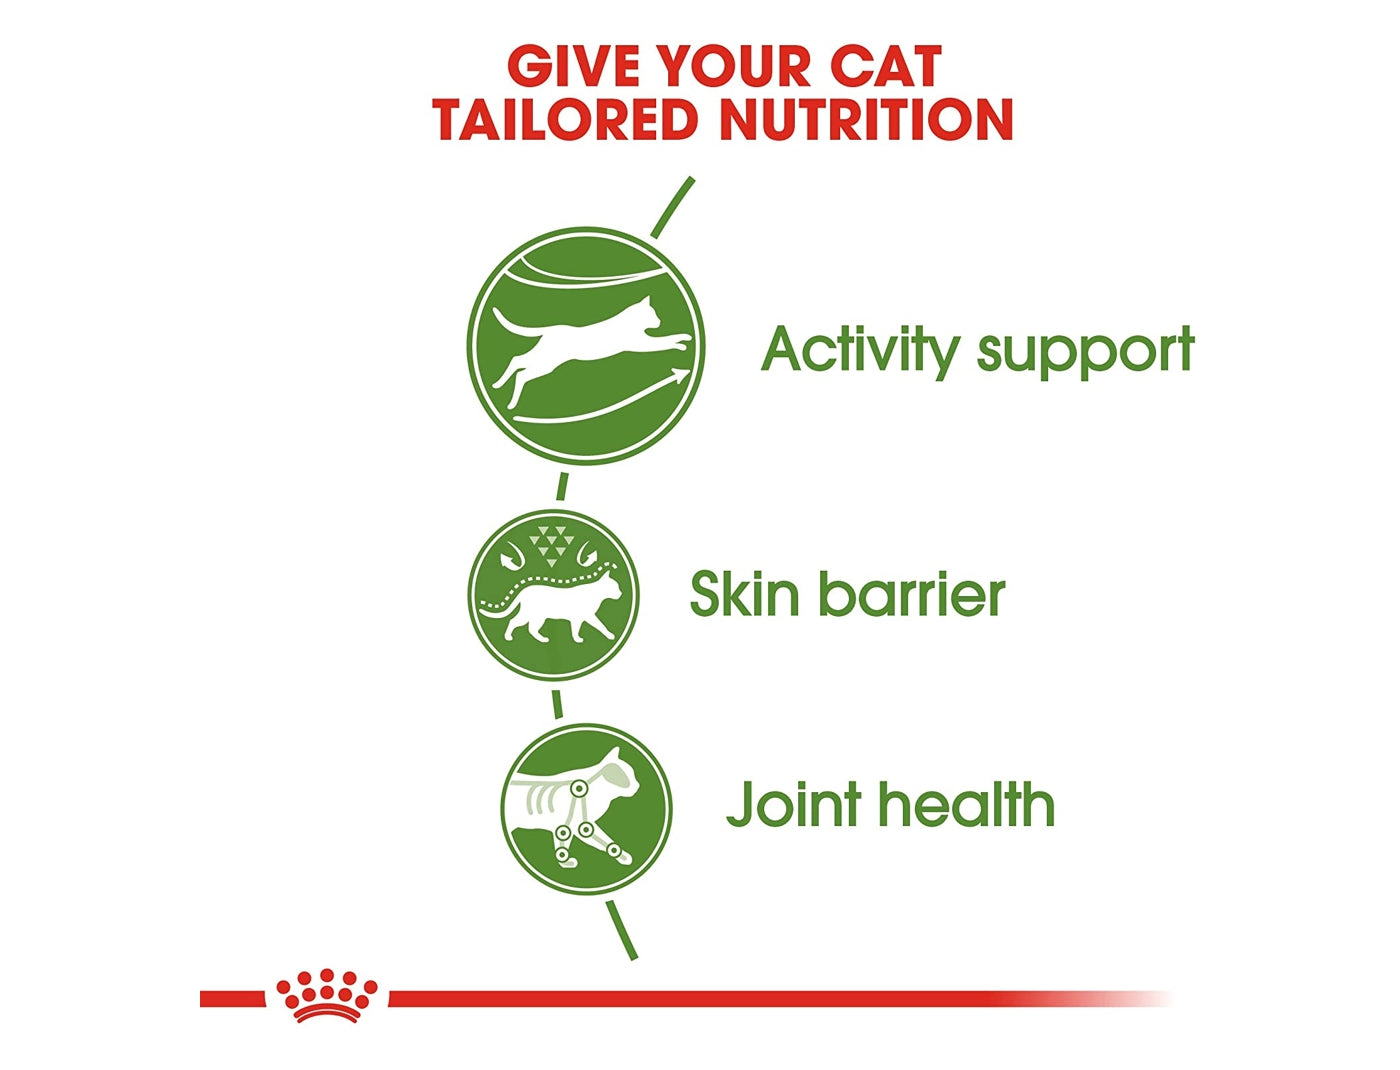 Royal Canin - Outdoor  - Cat Food